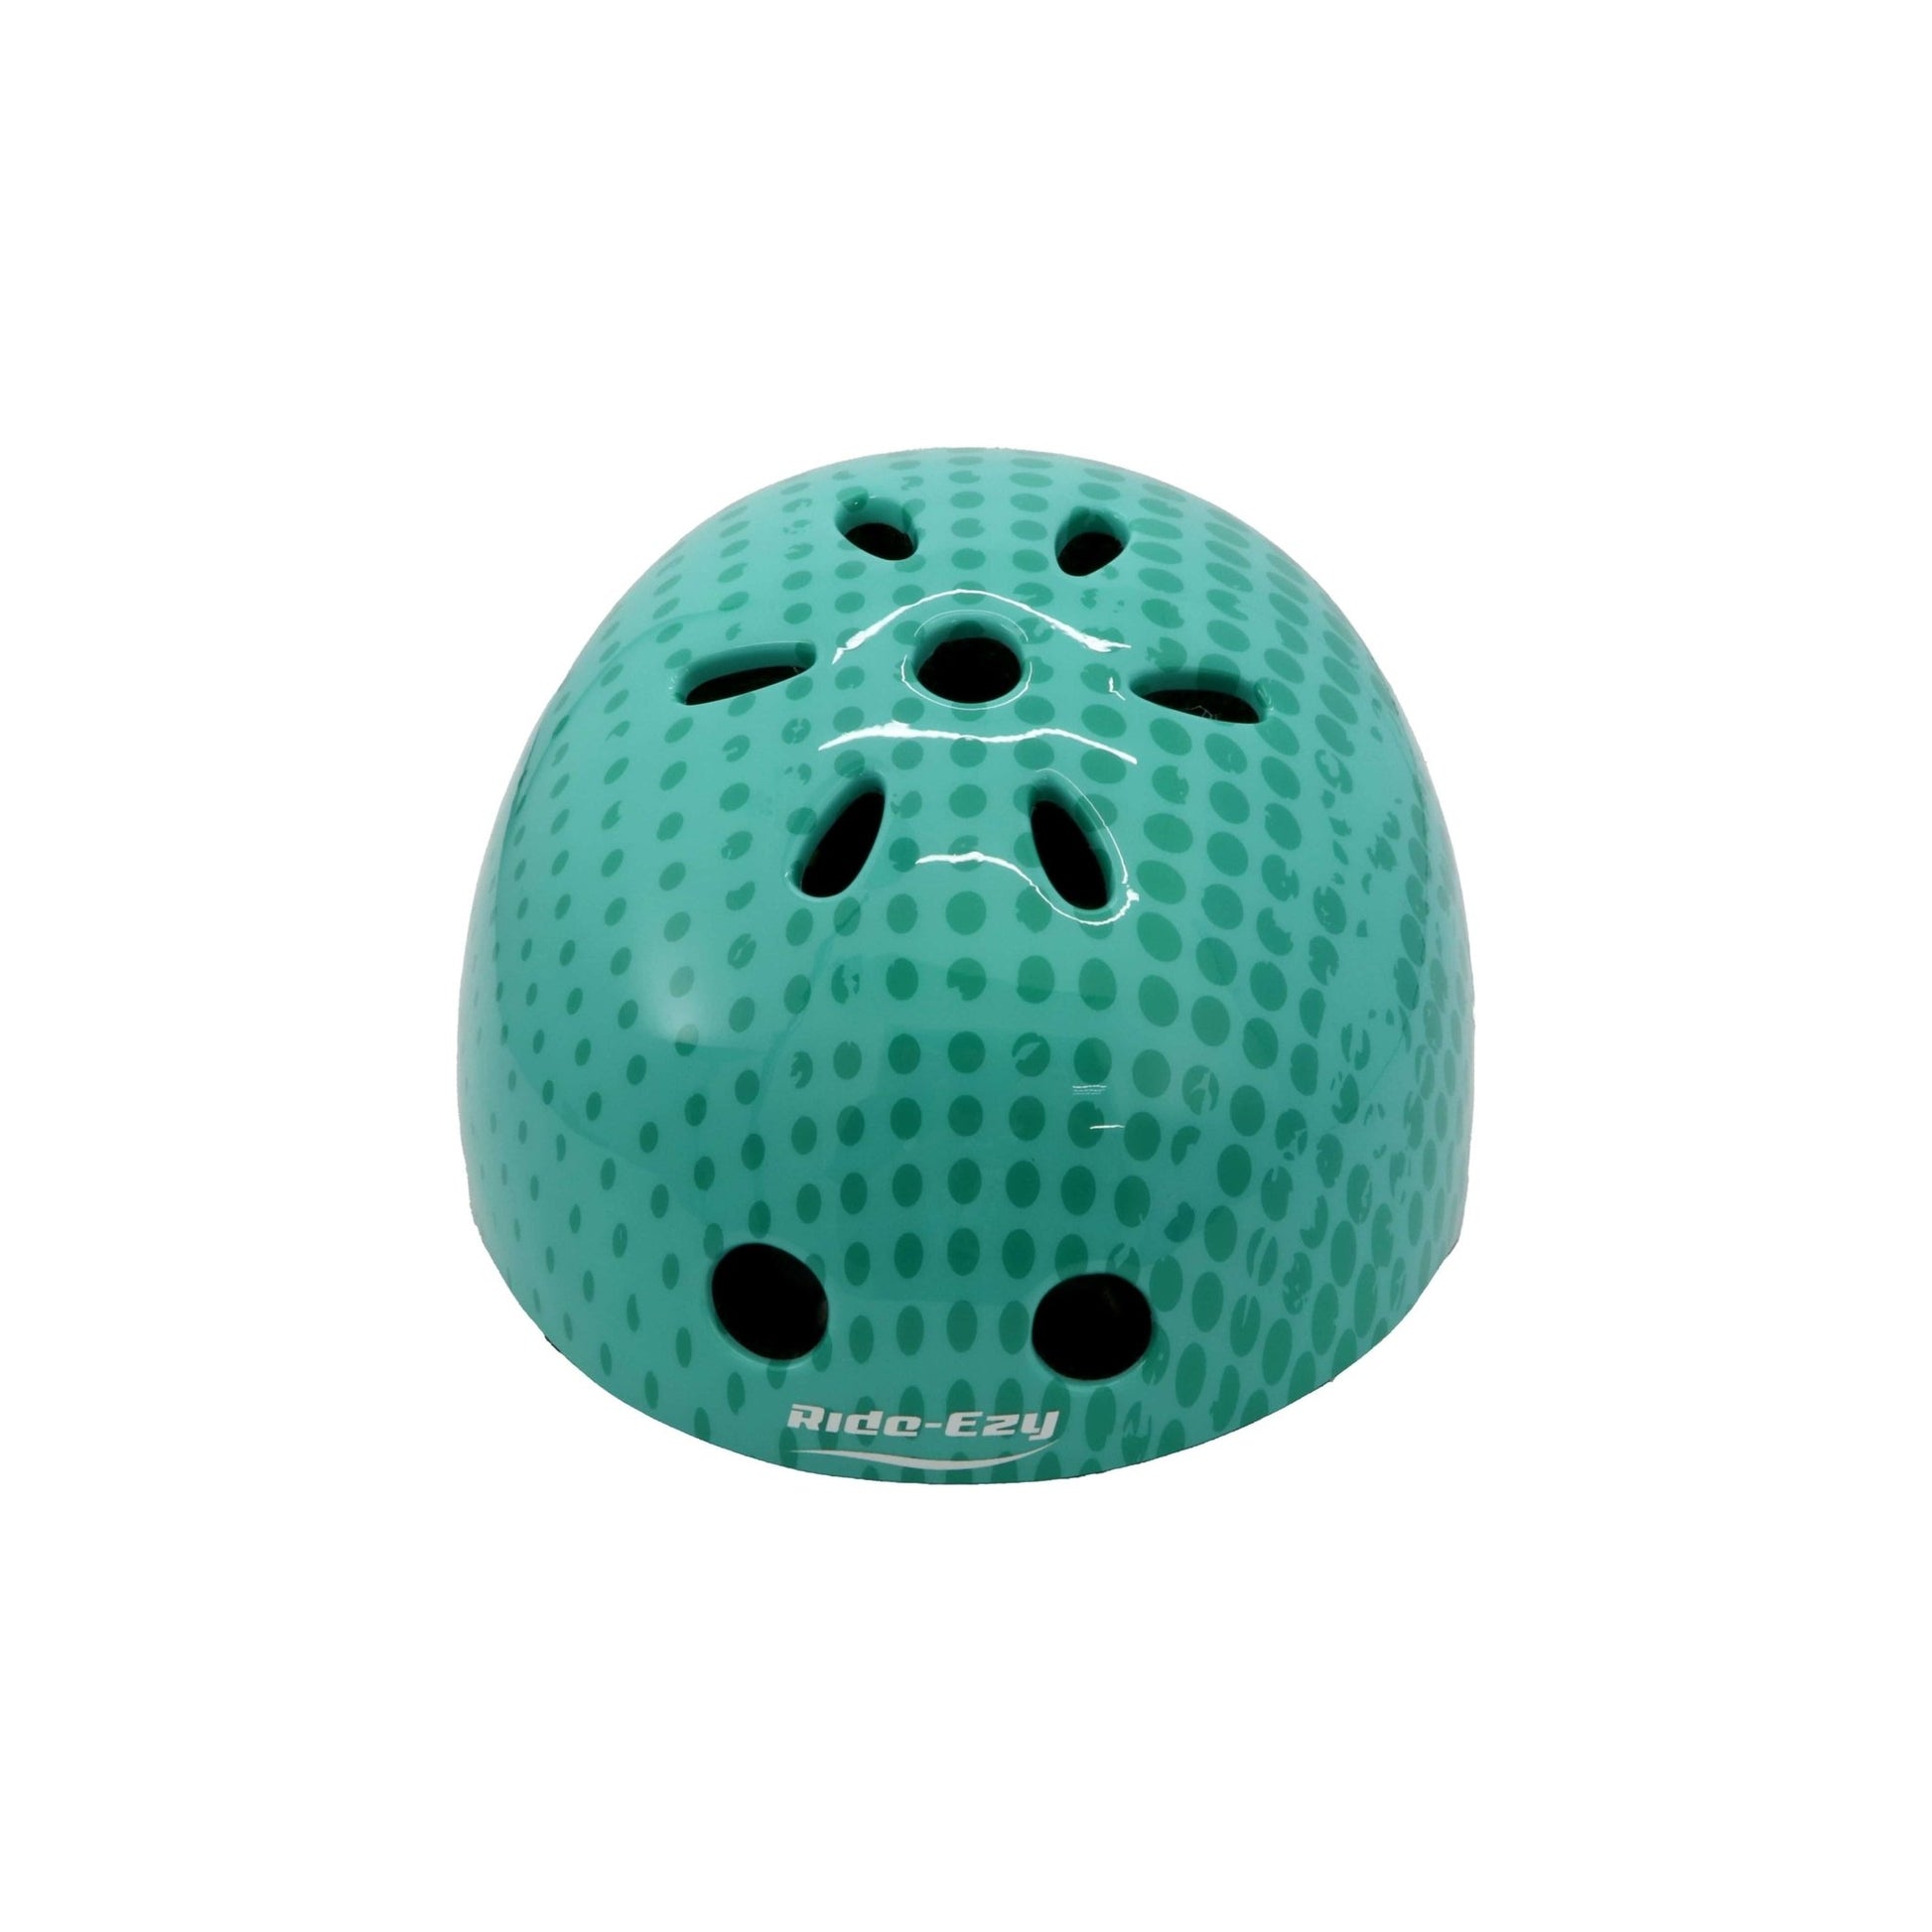 Ride-Ezy Hector 48-53cms Kids Helmet - Woodland Green front close up